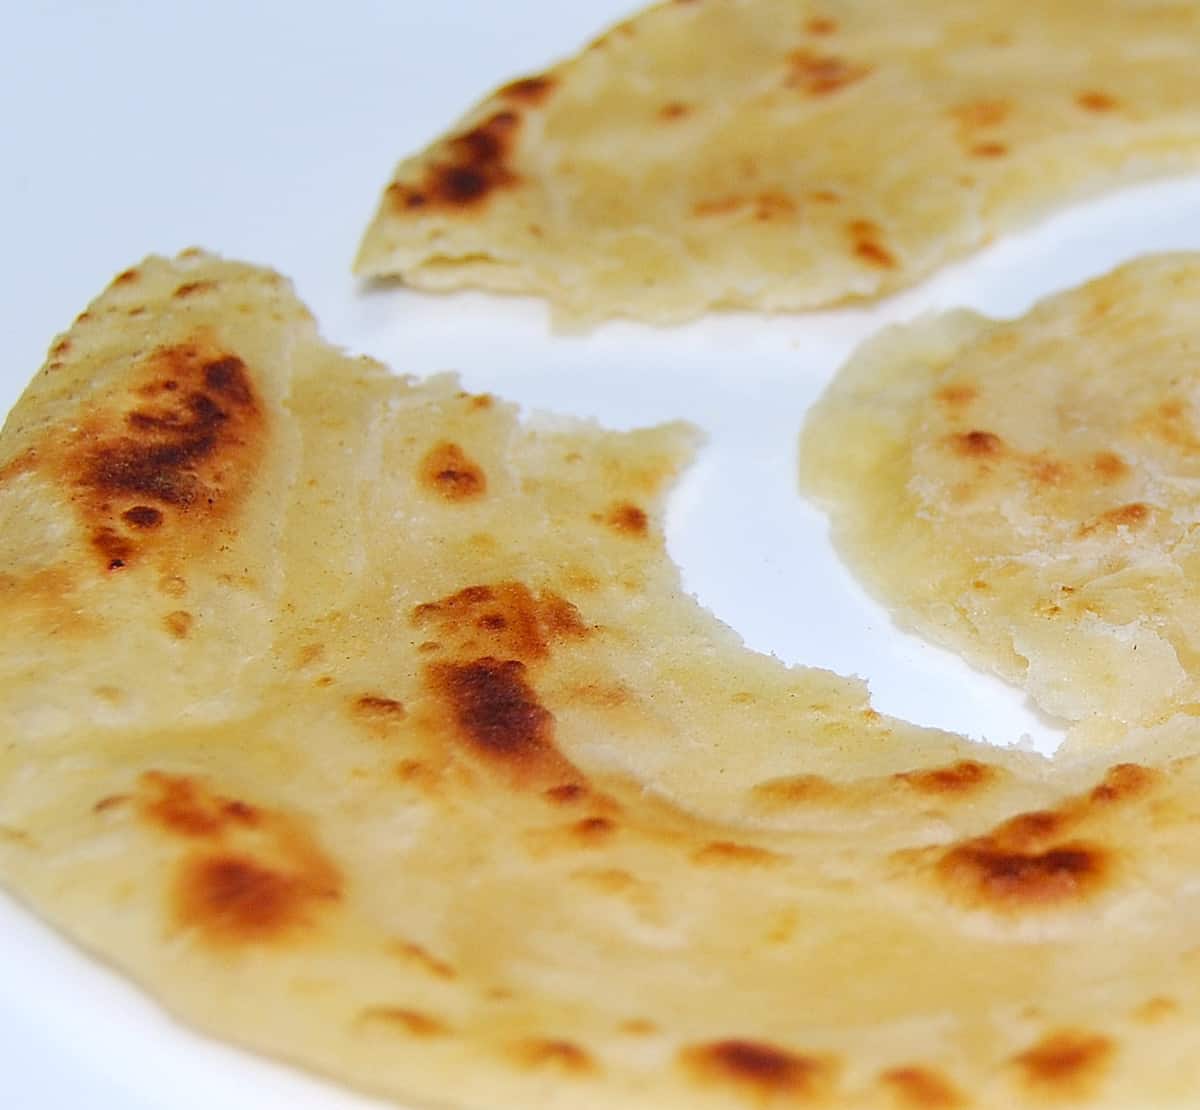 Khasta Paratha, torn up to show the layers, in a white plate